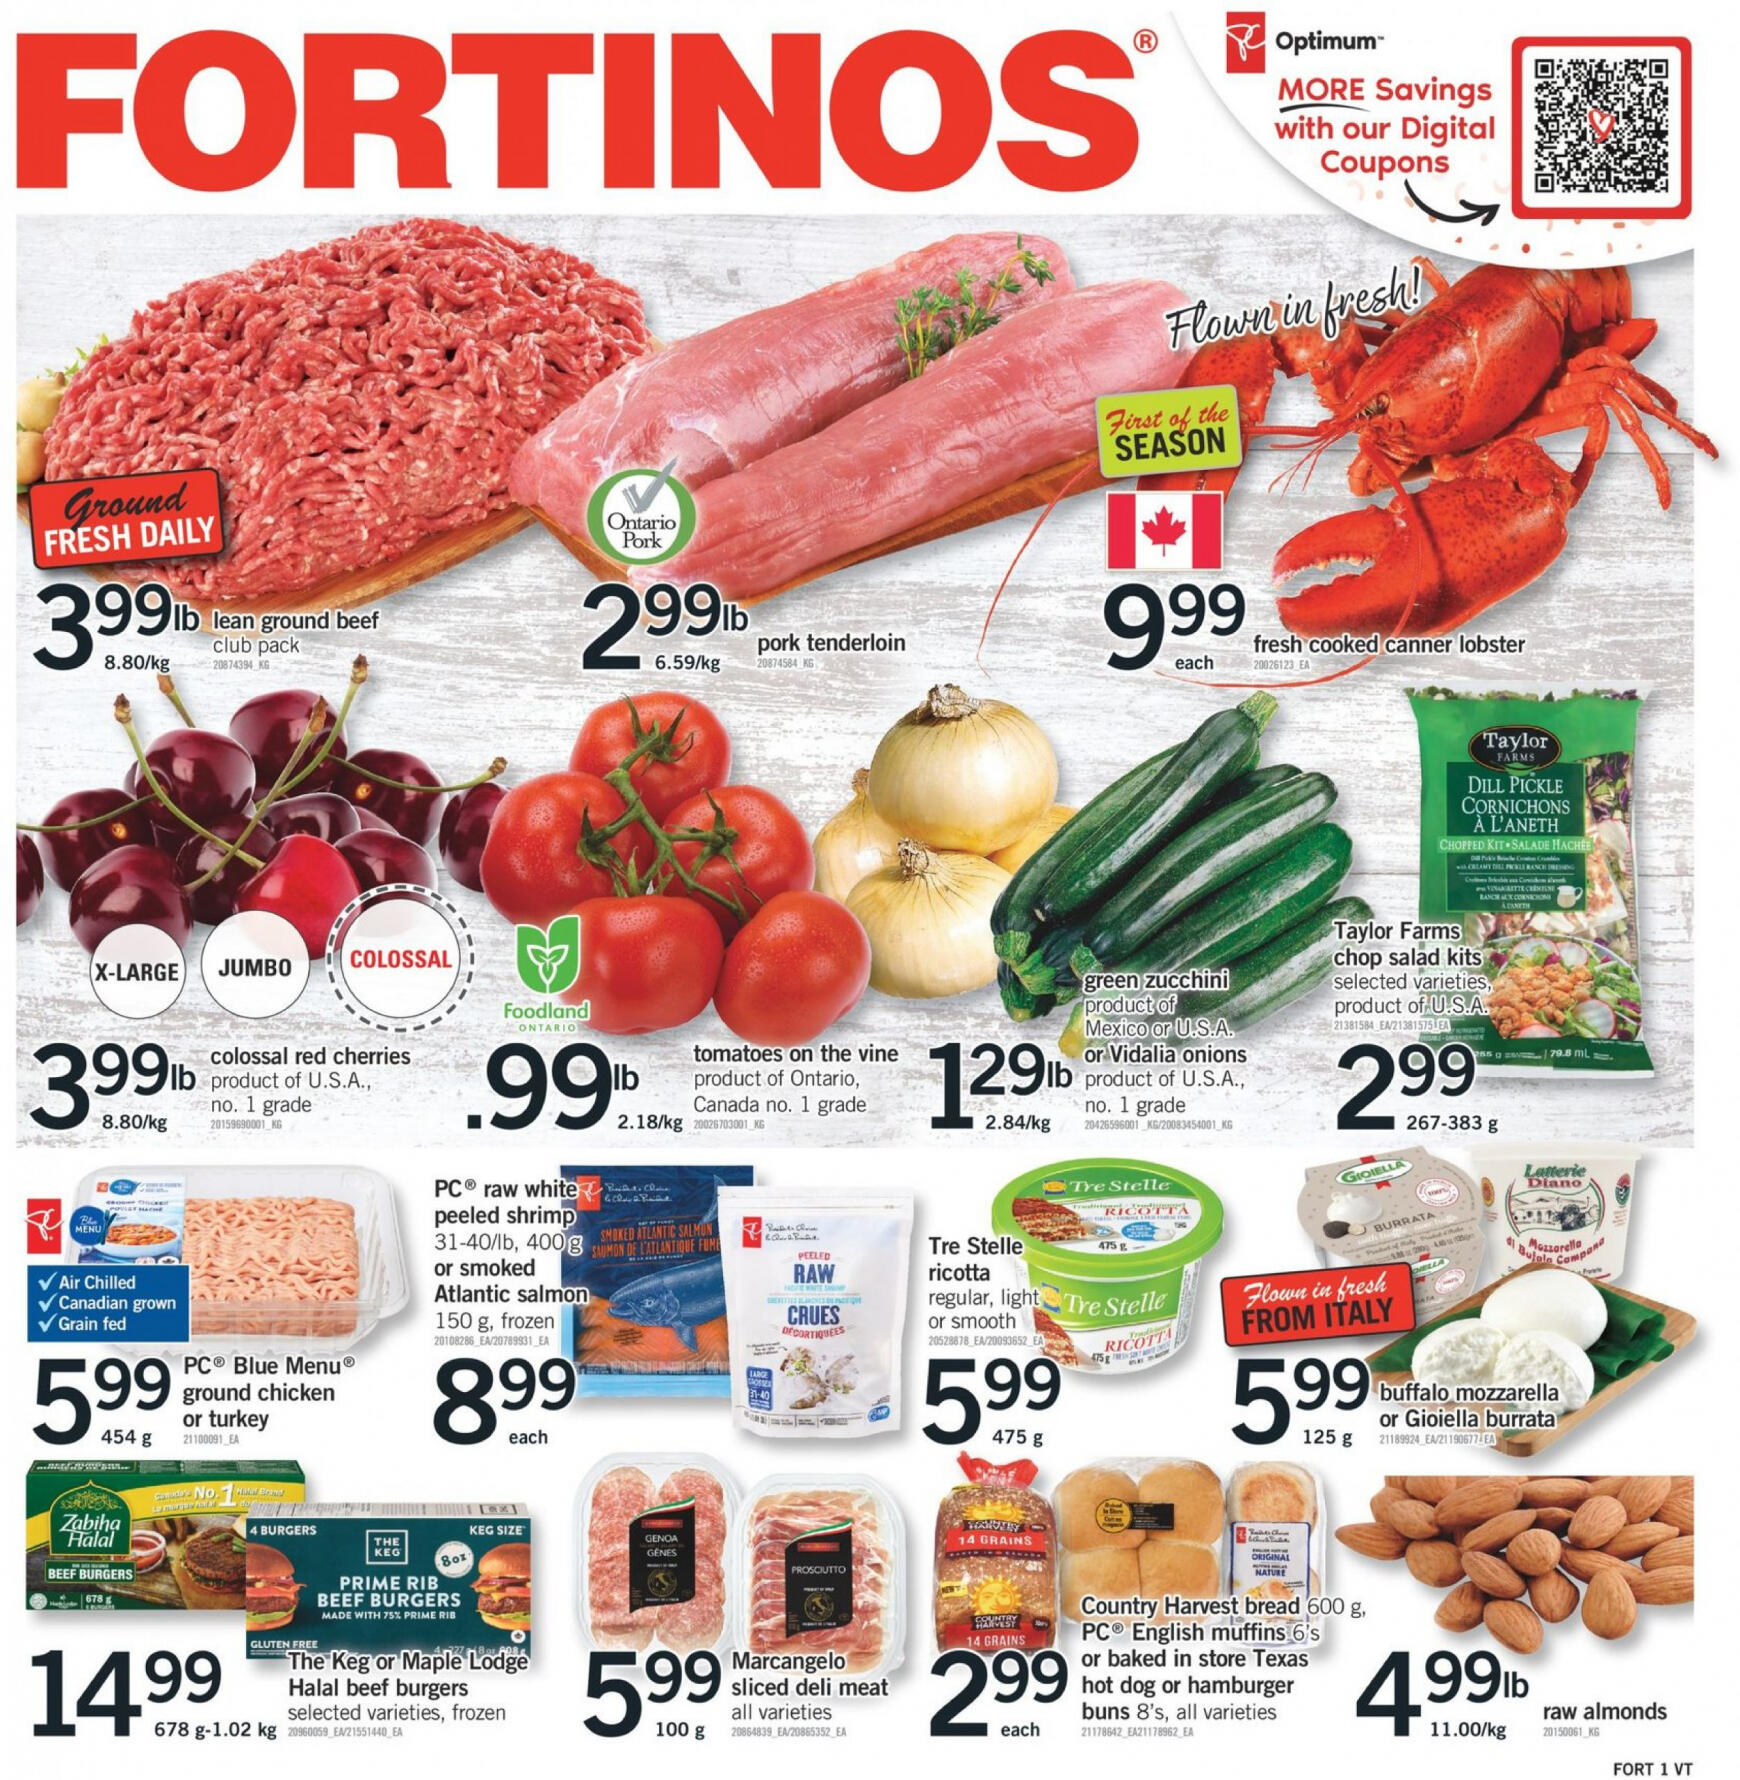 fortinos - Fortinos flyer current 30.05. - 05.06.